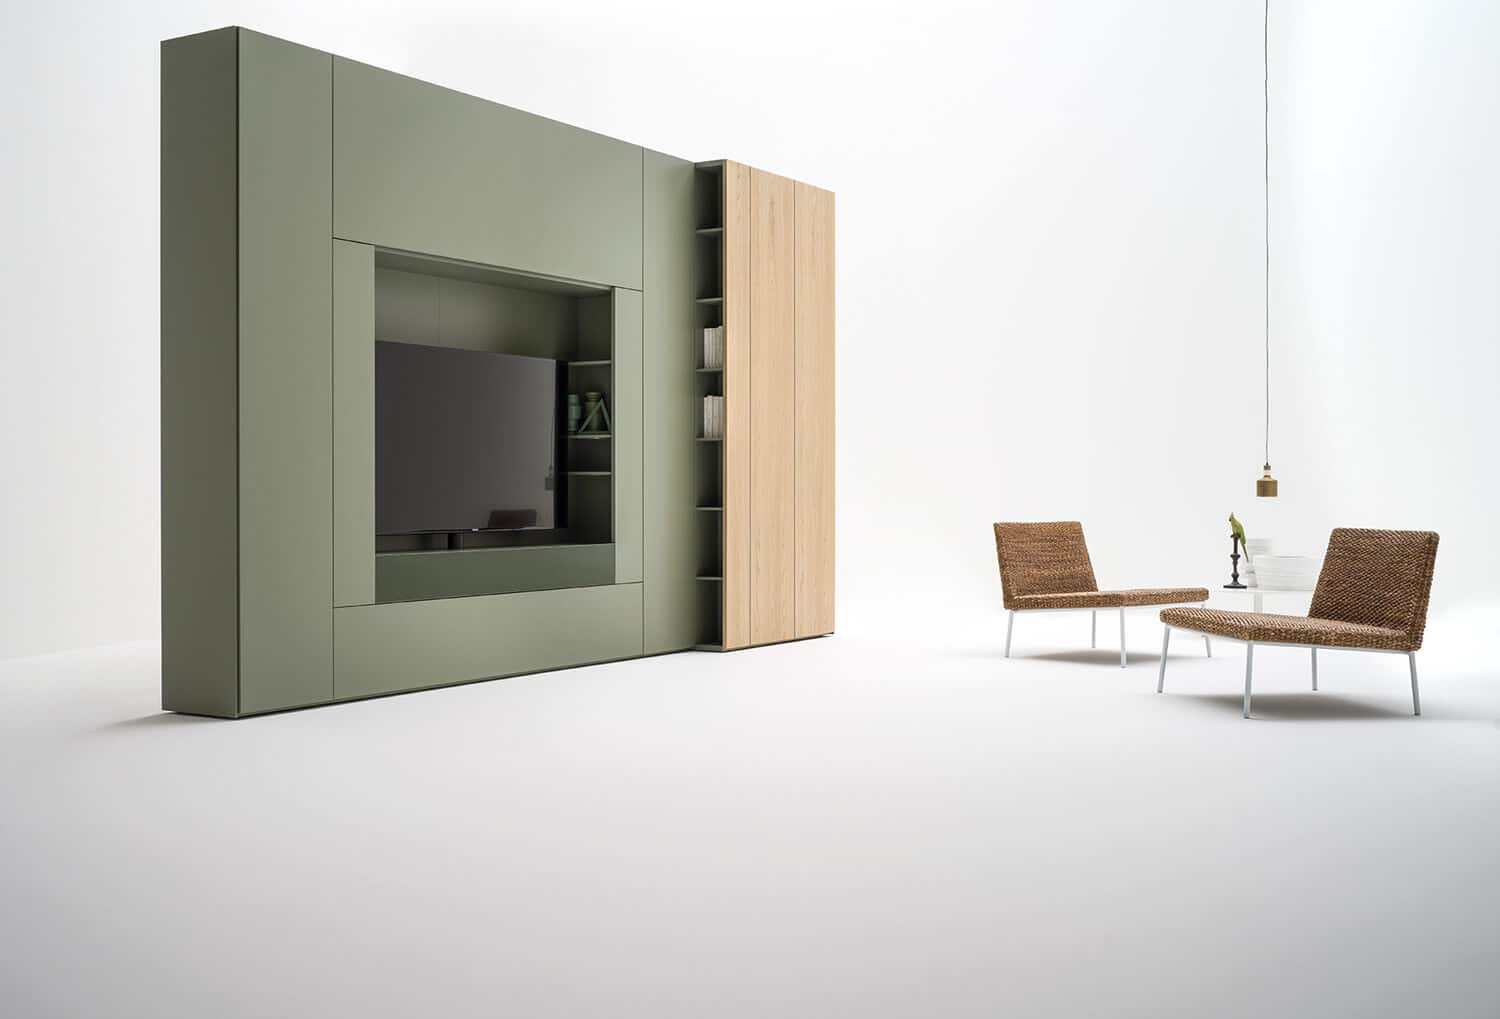 Modern closet system in two depths. Finishes: Oak and Quarzo matte lacquer.